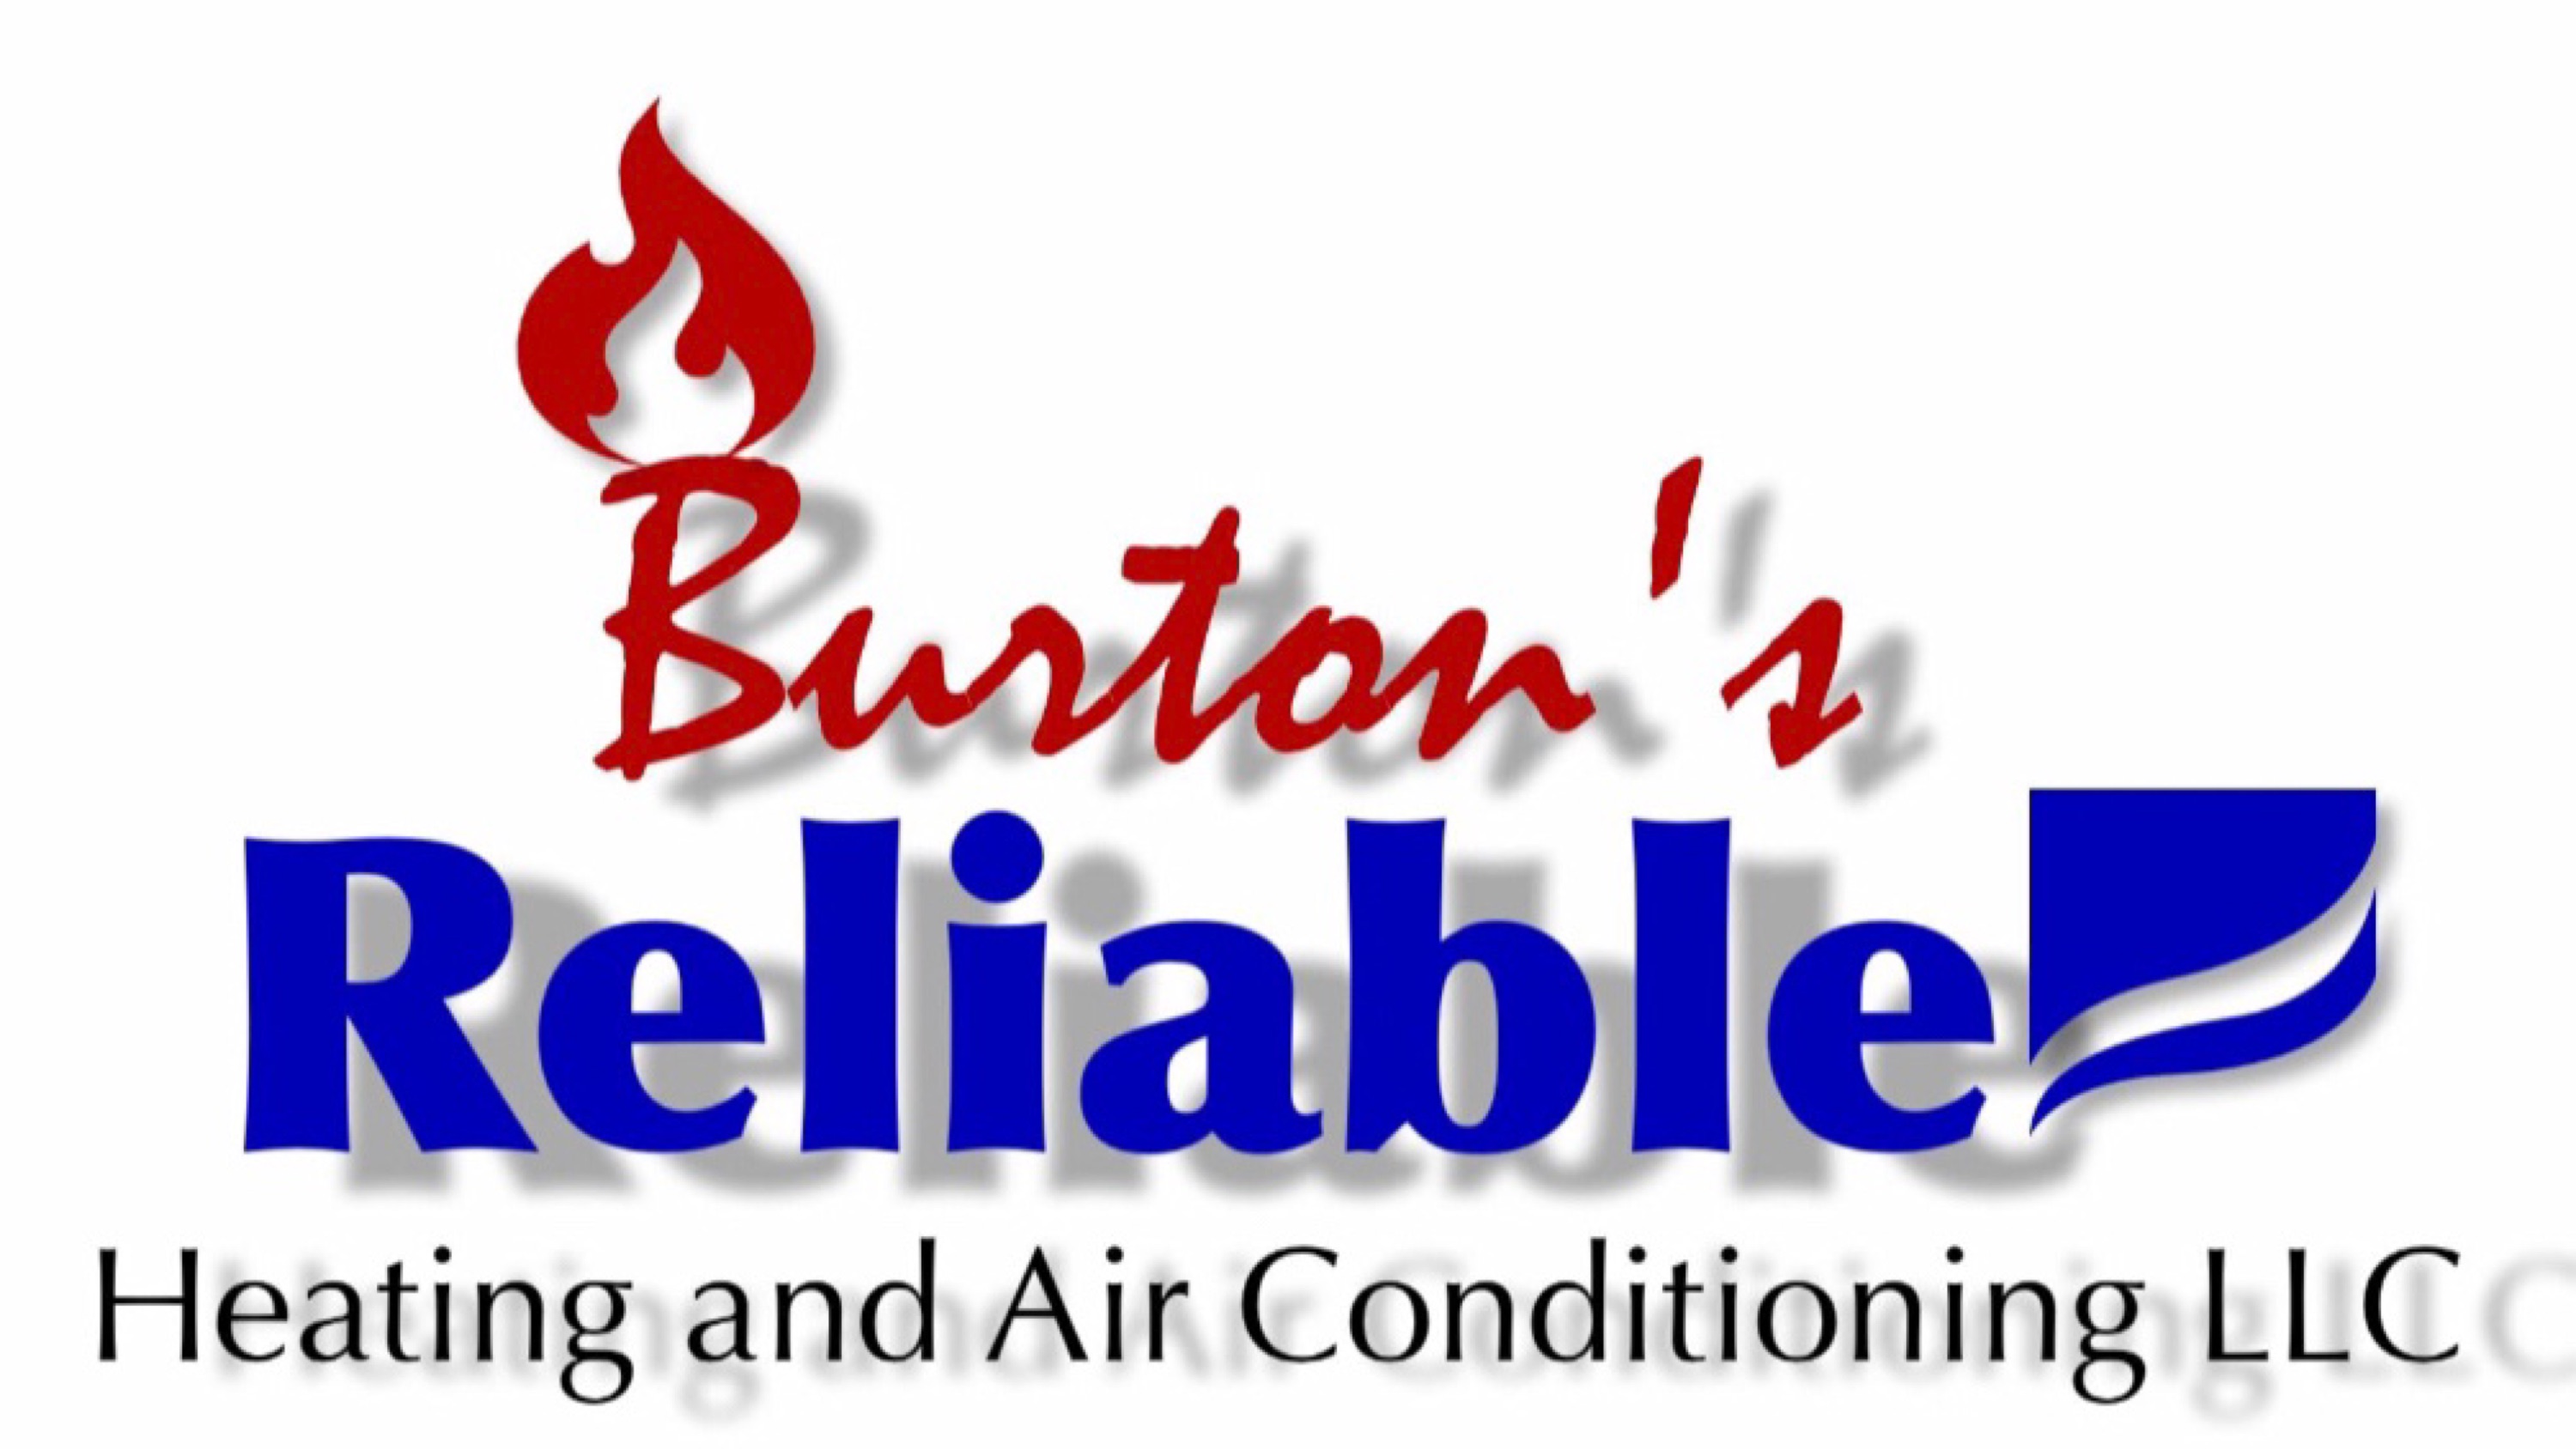 Burton's Reliable Heating and Air Conditioning Logo